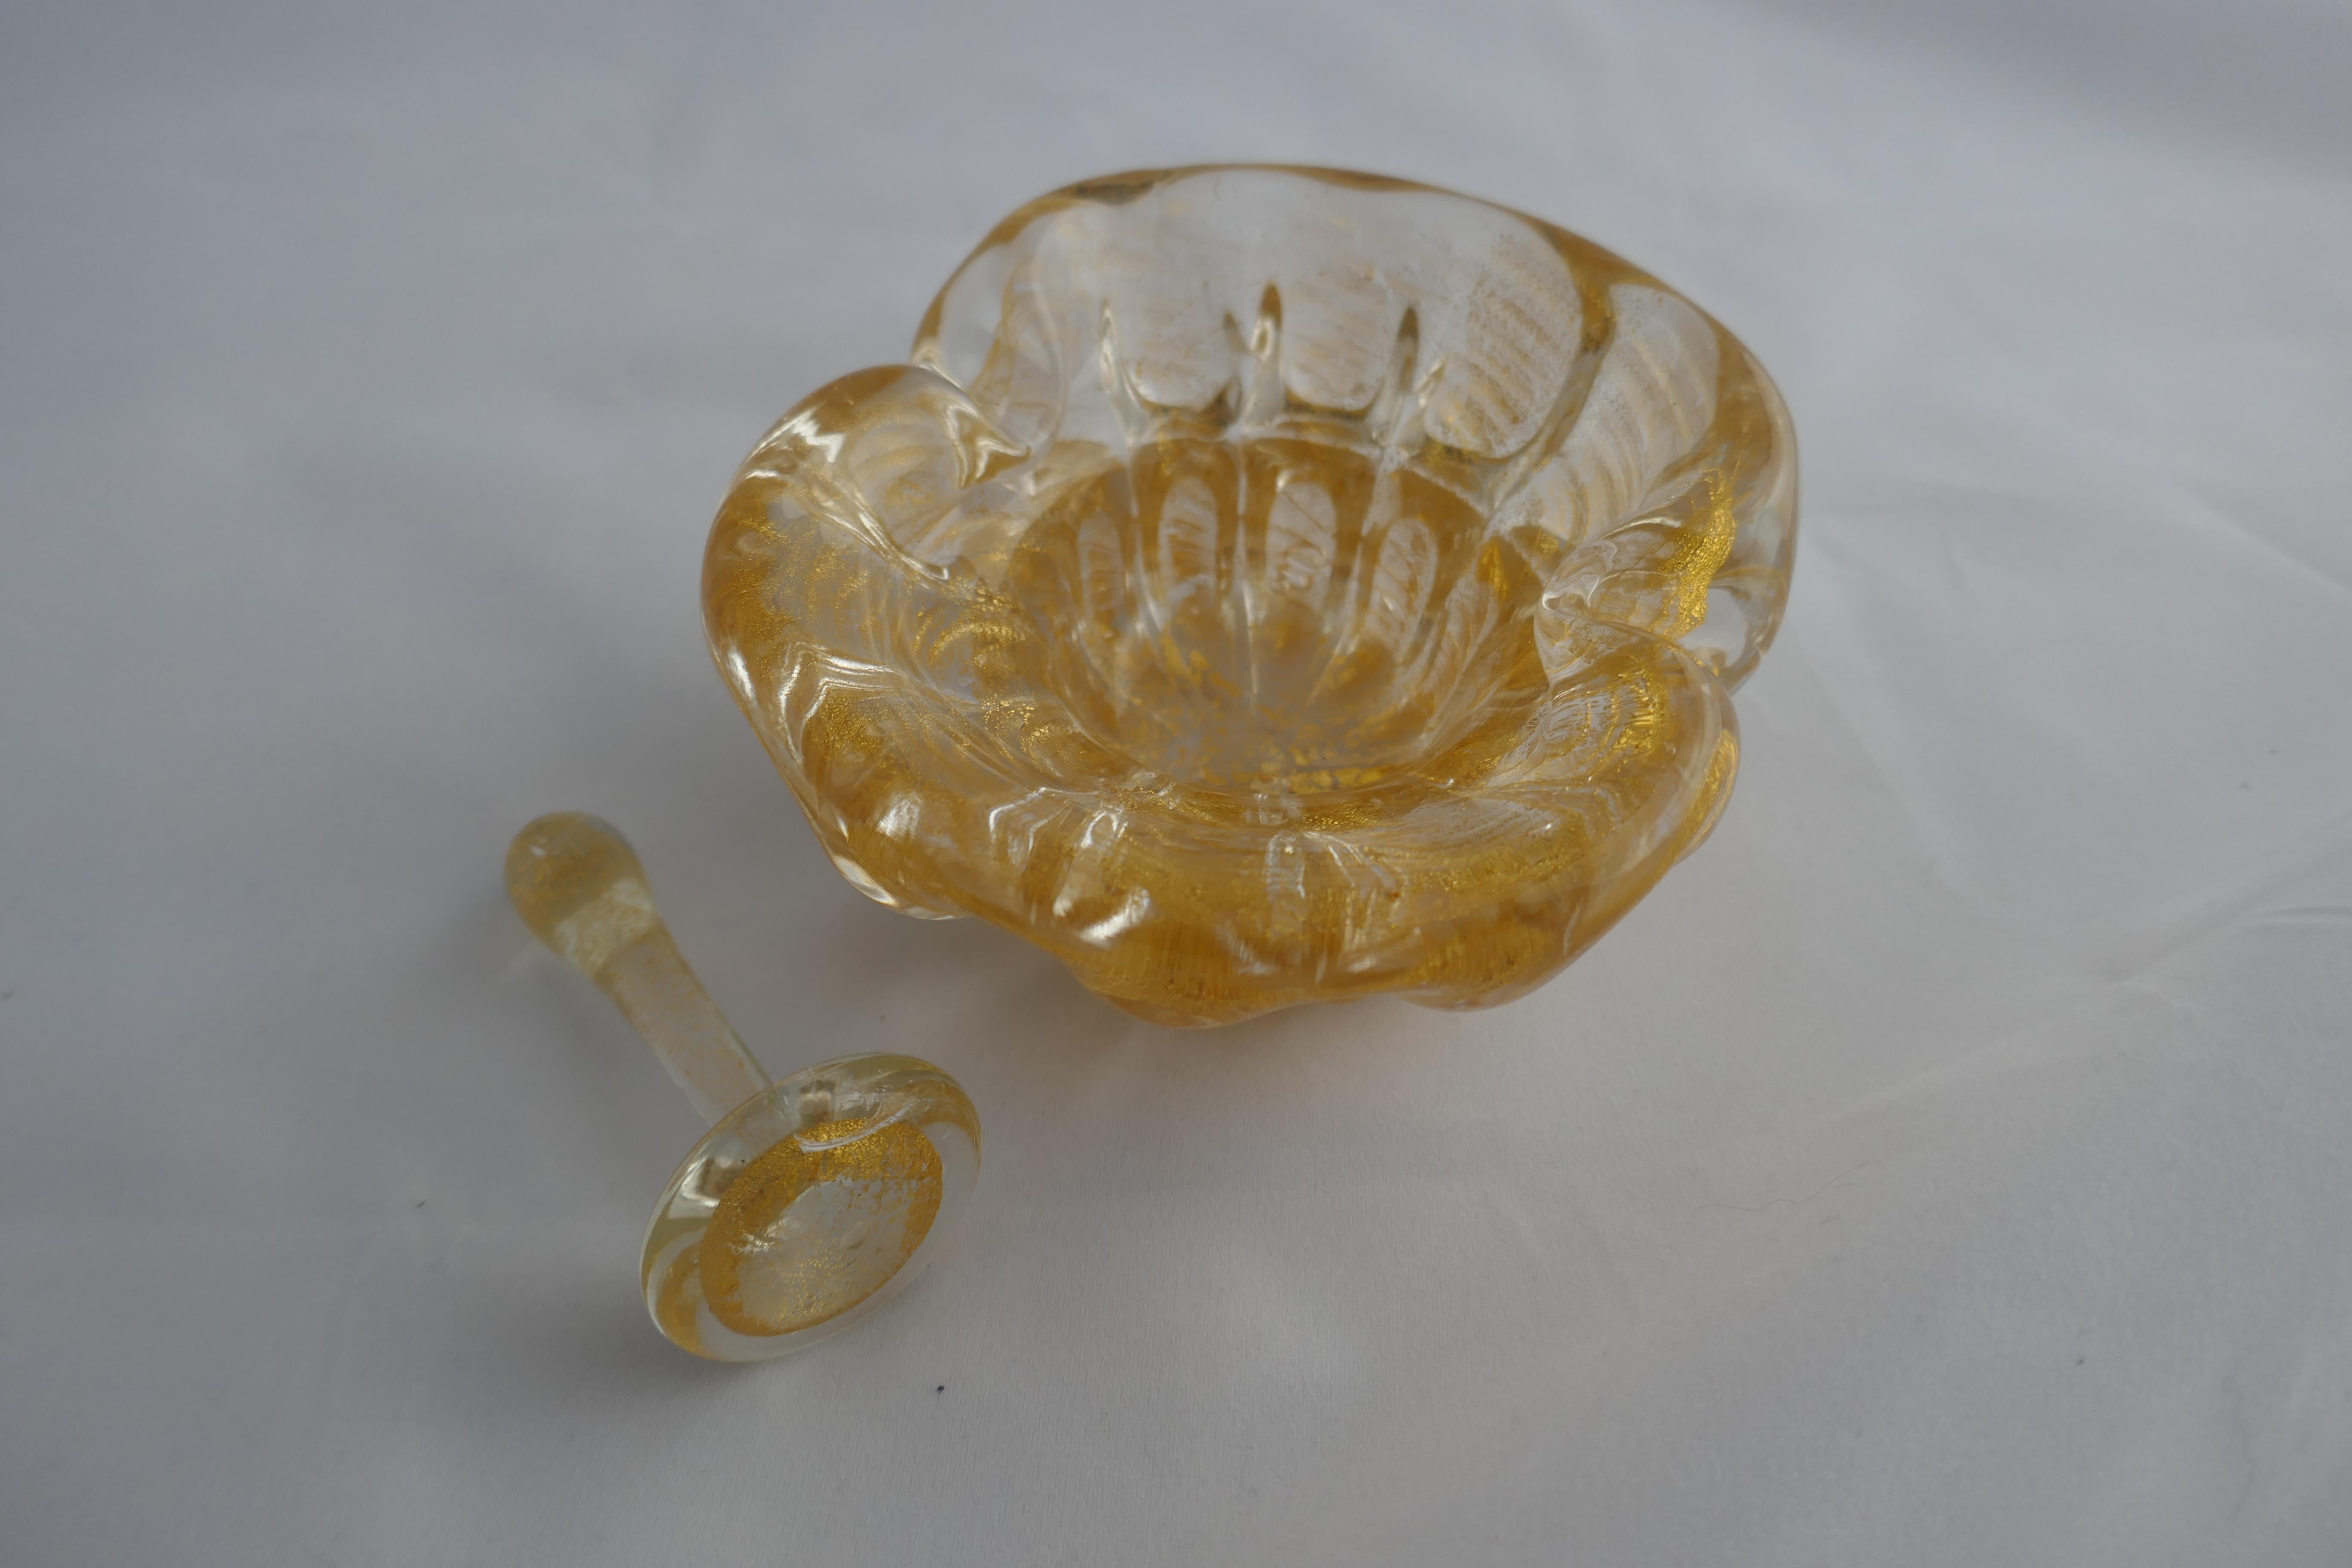 Glass Vintage Gold Dust Archimede Seguso Murano Ashtray or Bowl with Pestle